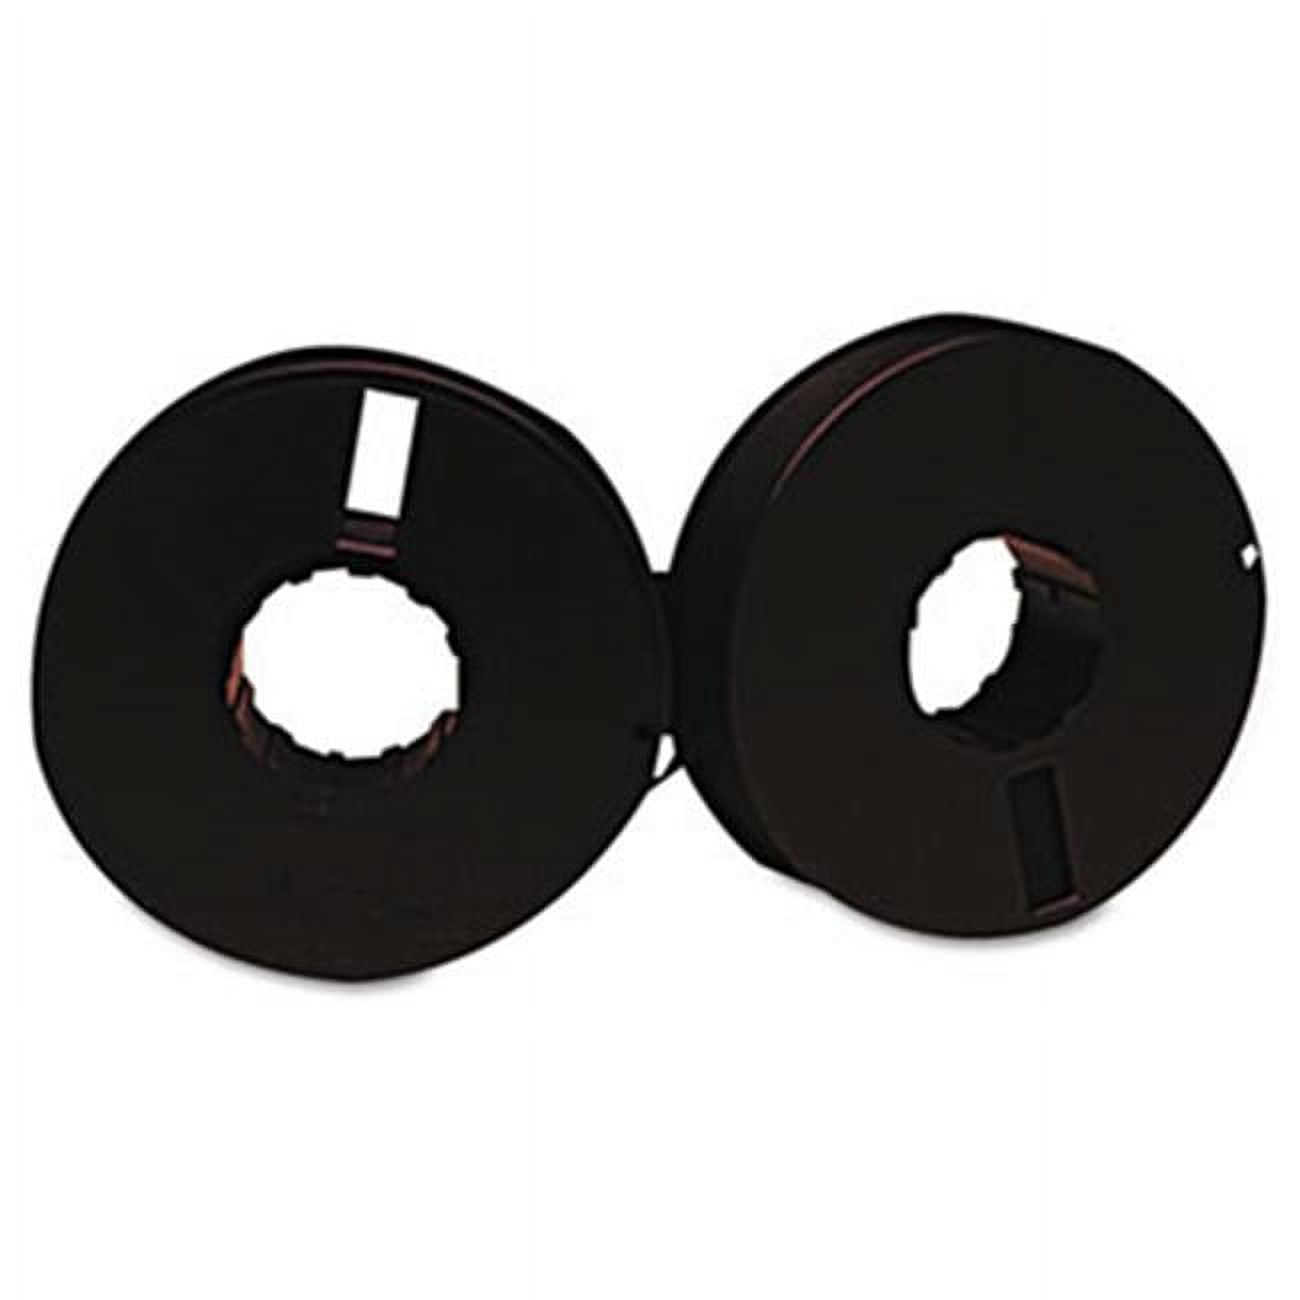 Dataproducts. P3200 P3200 Compatible Ribbon- Black - image 1 of 1